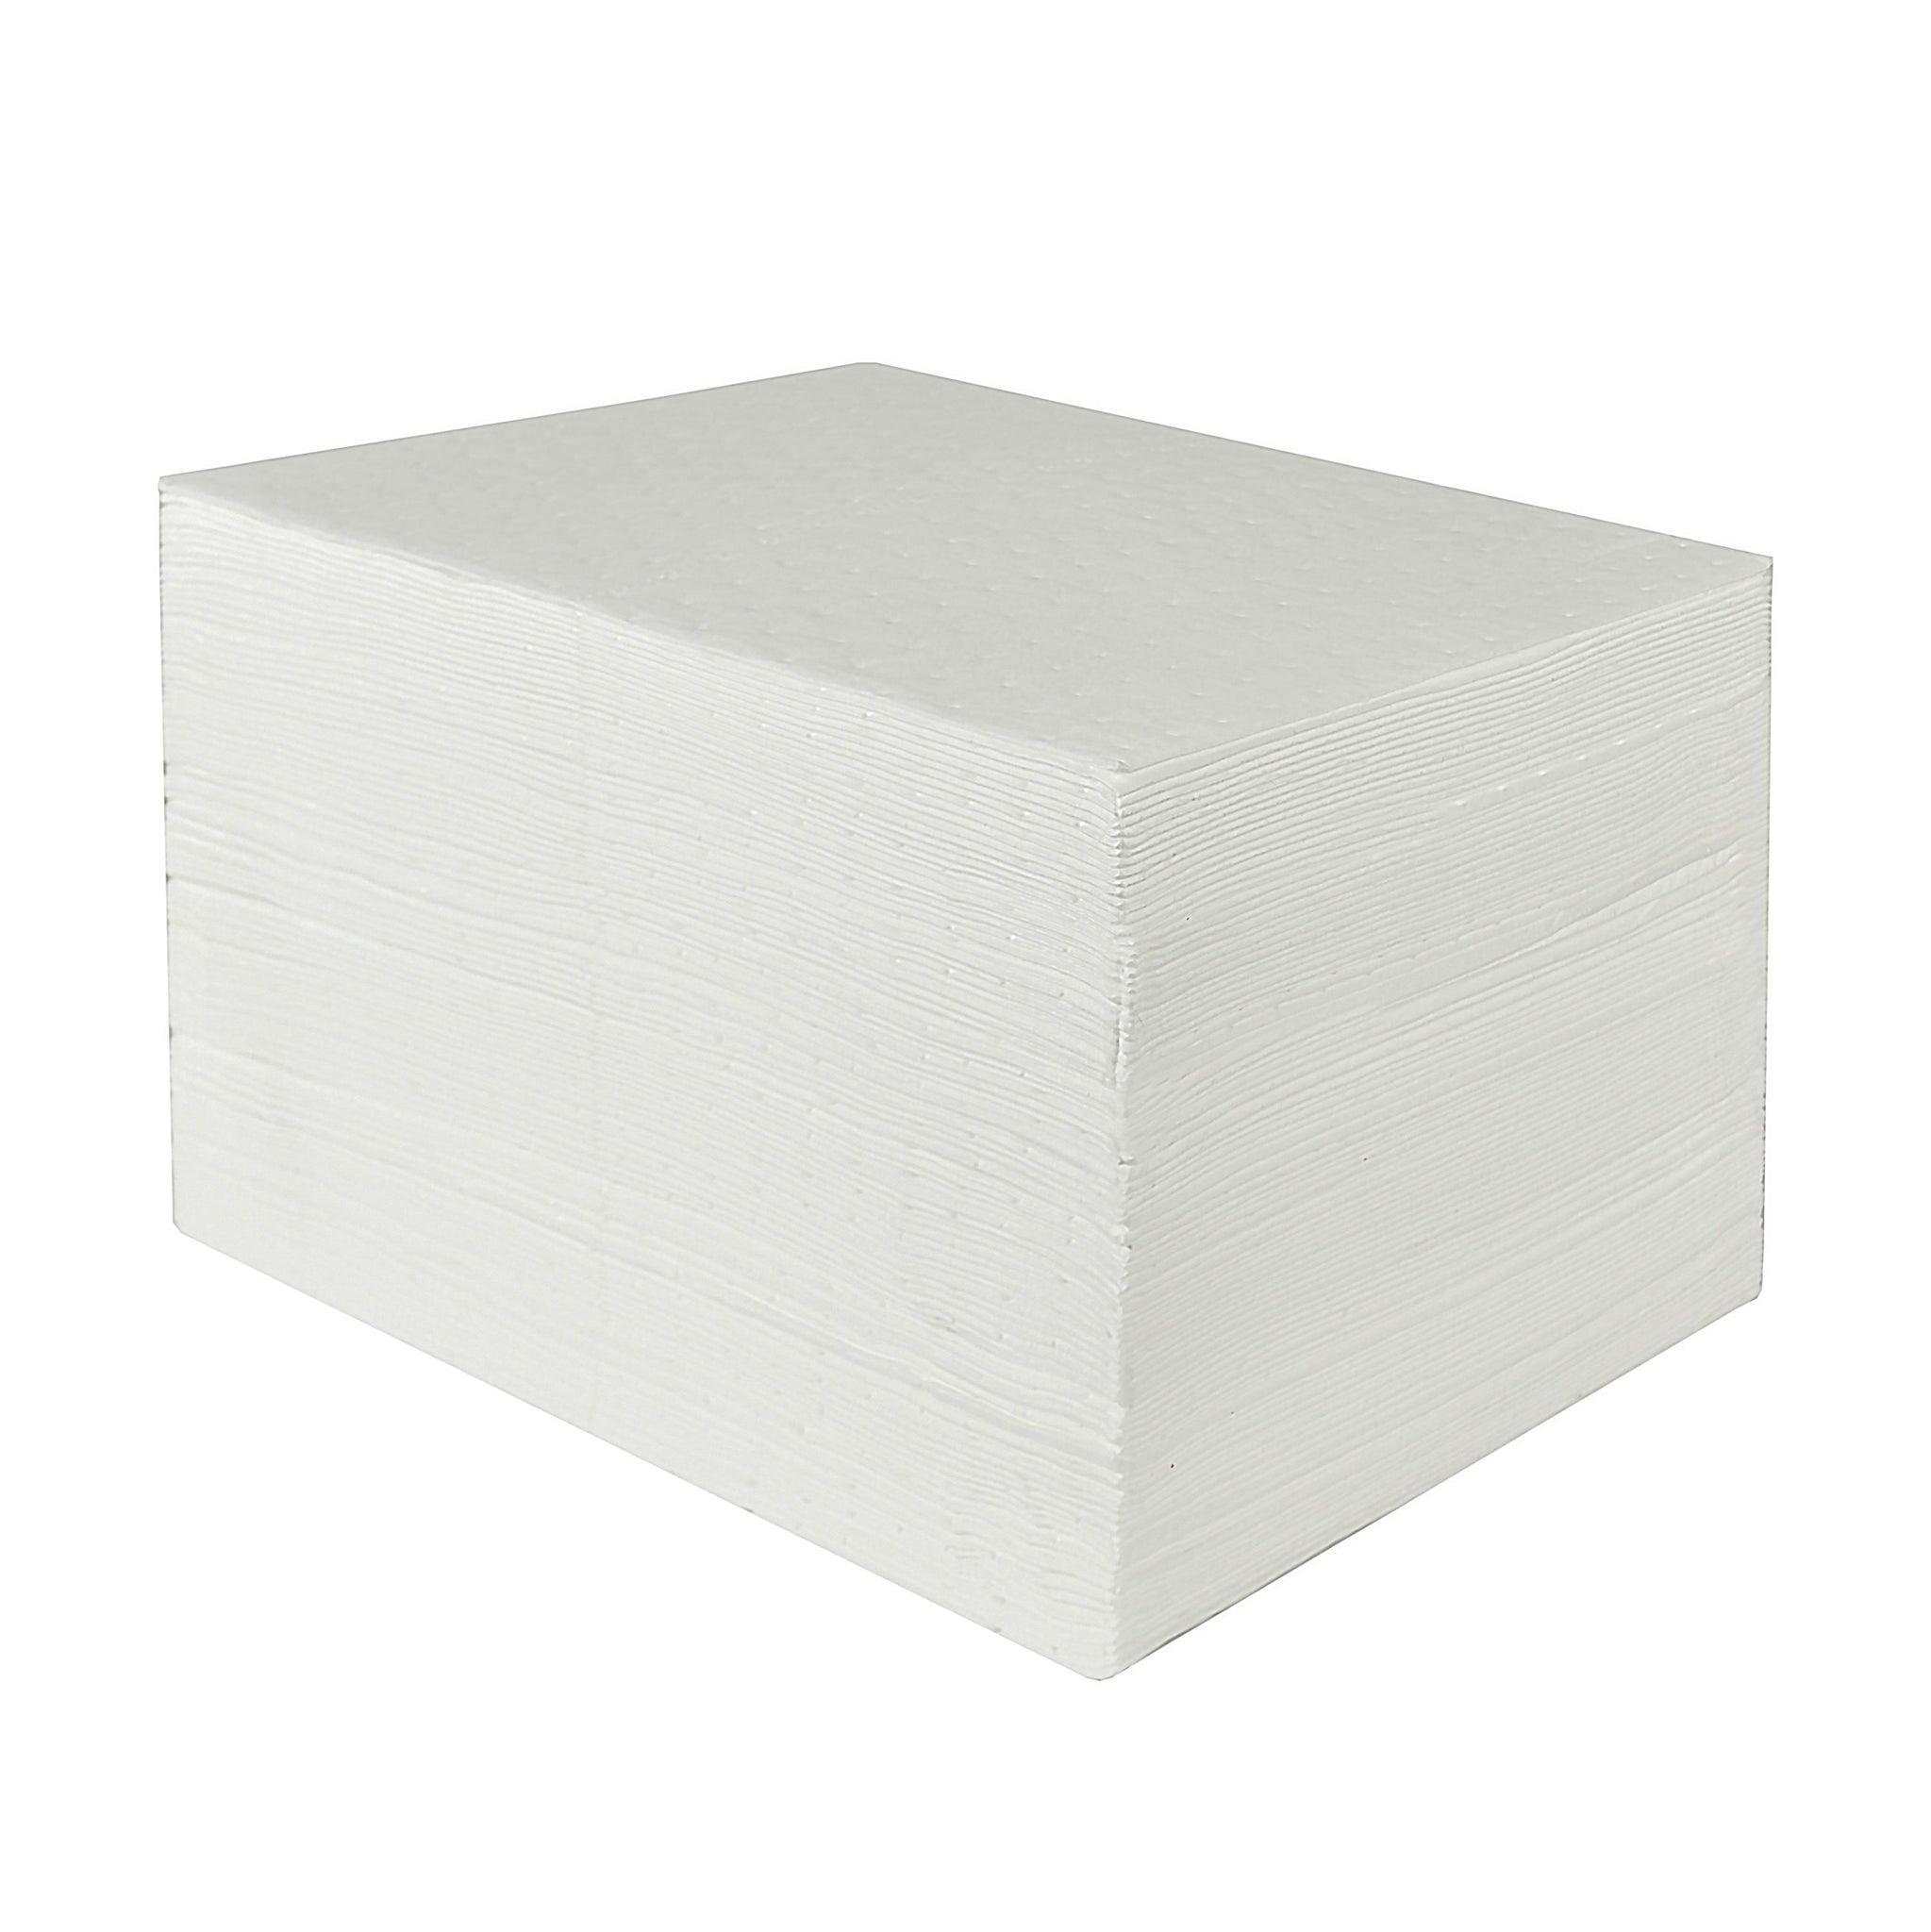 What Are Oil Absorbent Pads and How Do They Absorb Diesel or